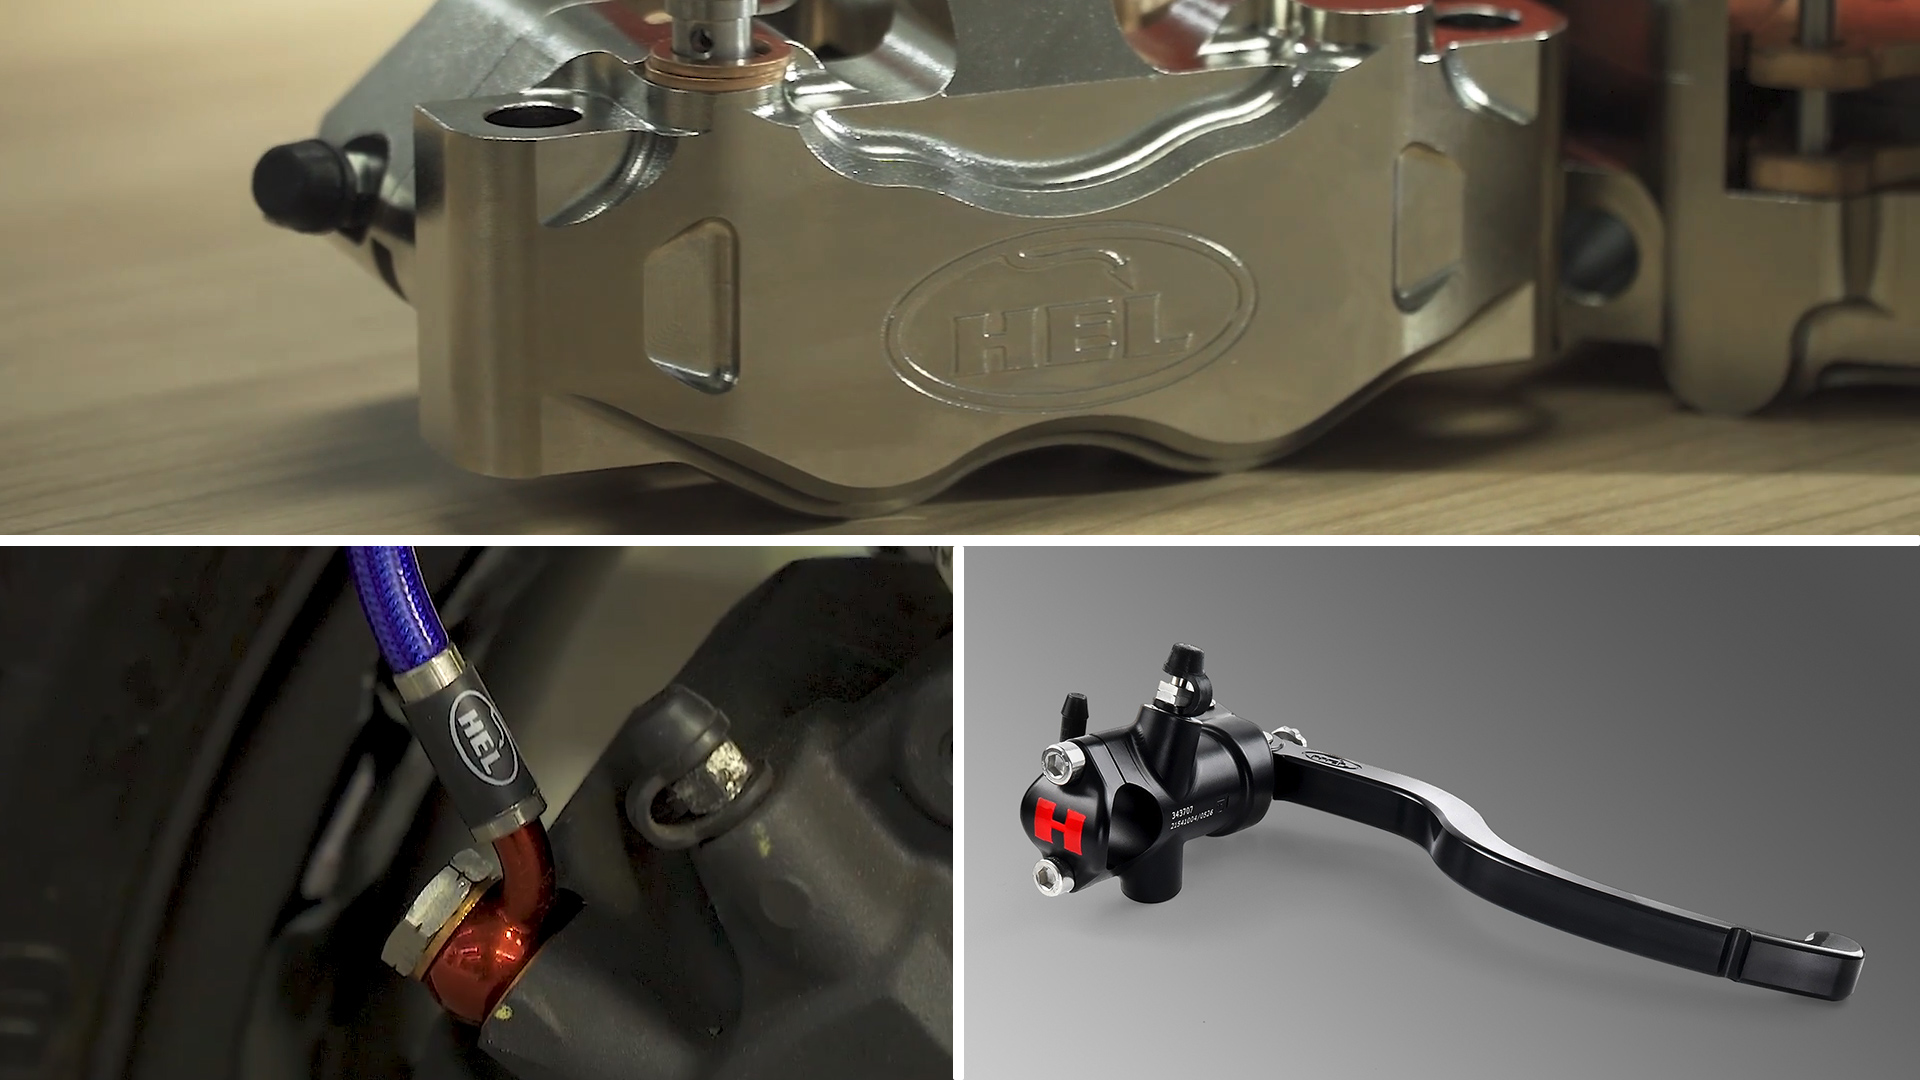 Today the HEL Performance product line includes Braided Lines, Break Calipers, Thumb Breaks, Oil Cooling and much more.